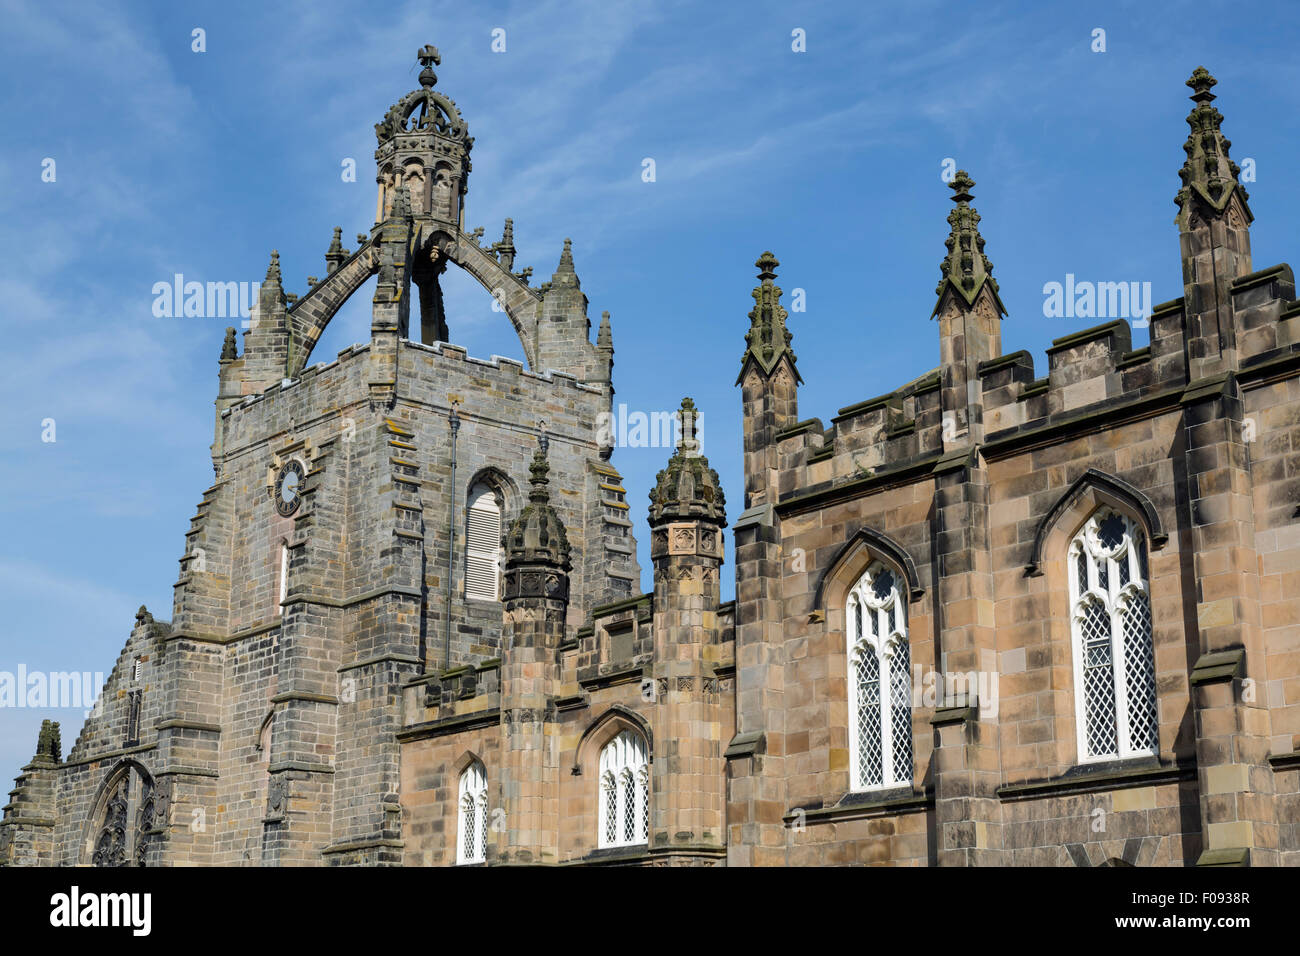 King's College at the University of Aberdeen, Scotland, UK, Europe Stock Photo